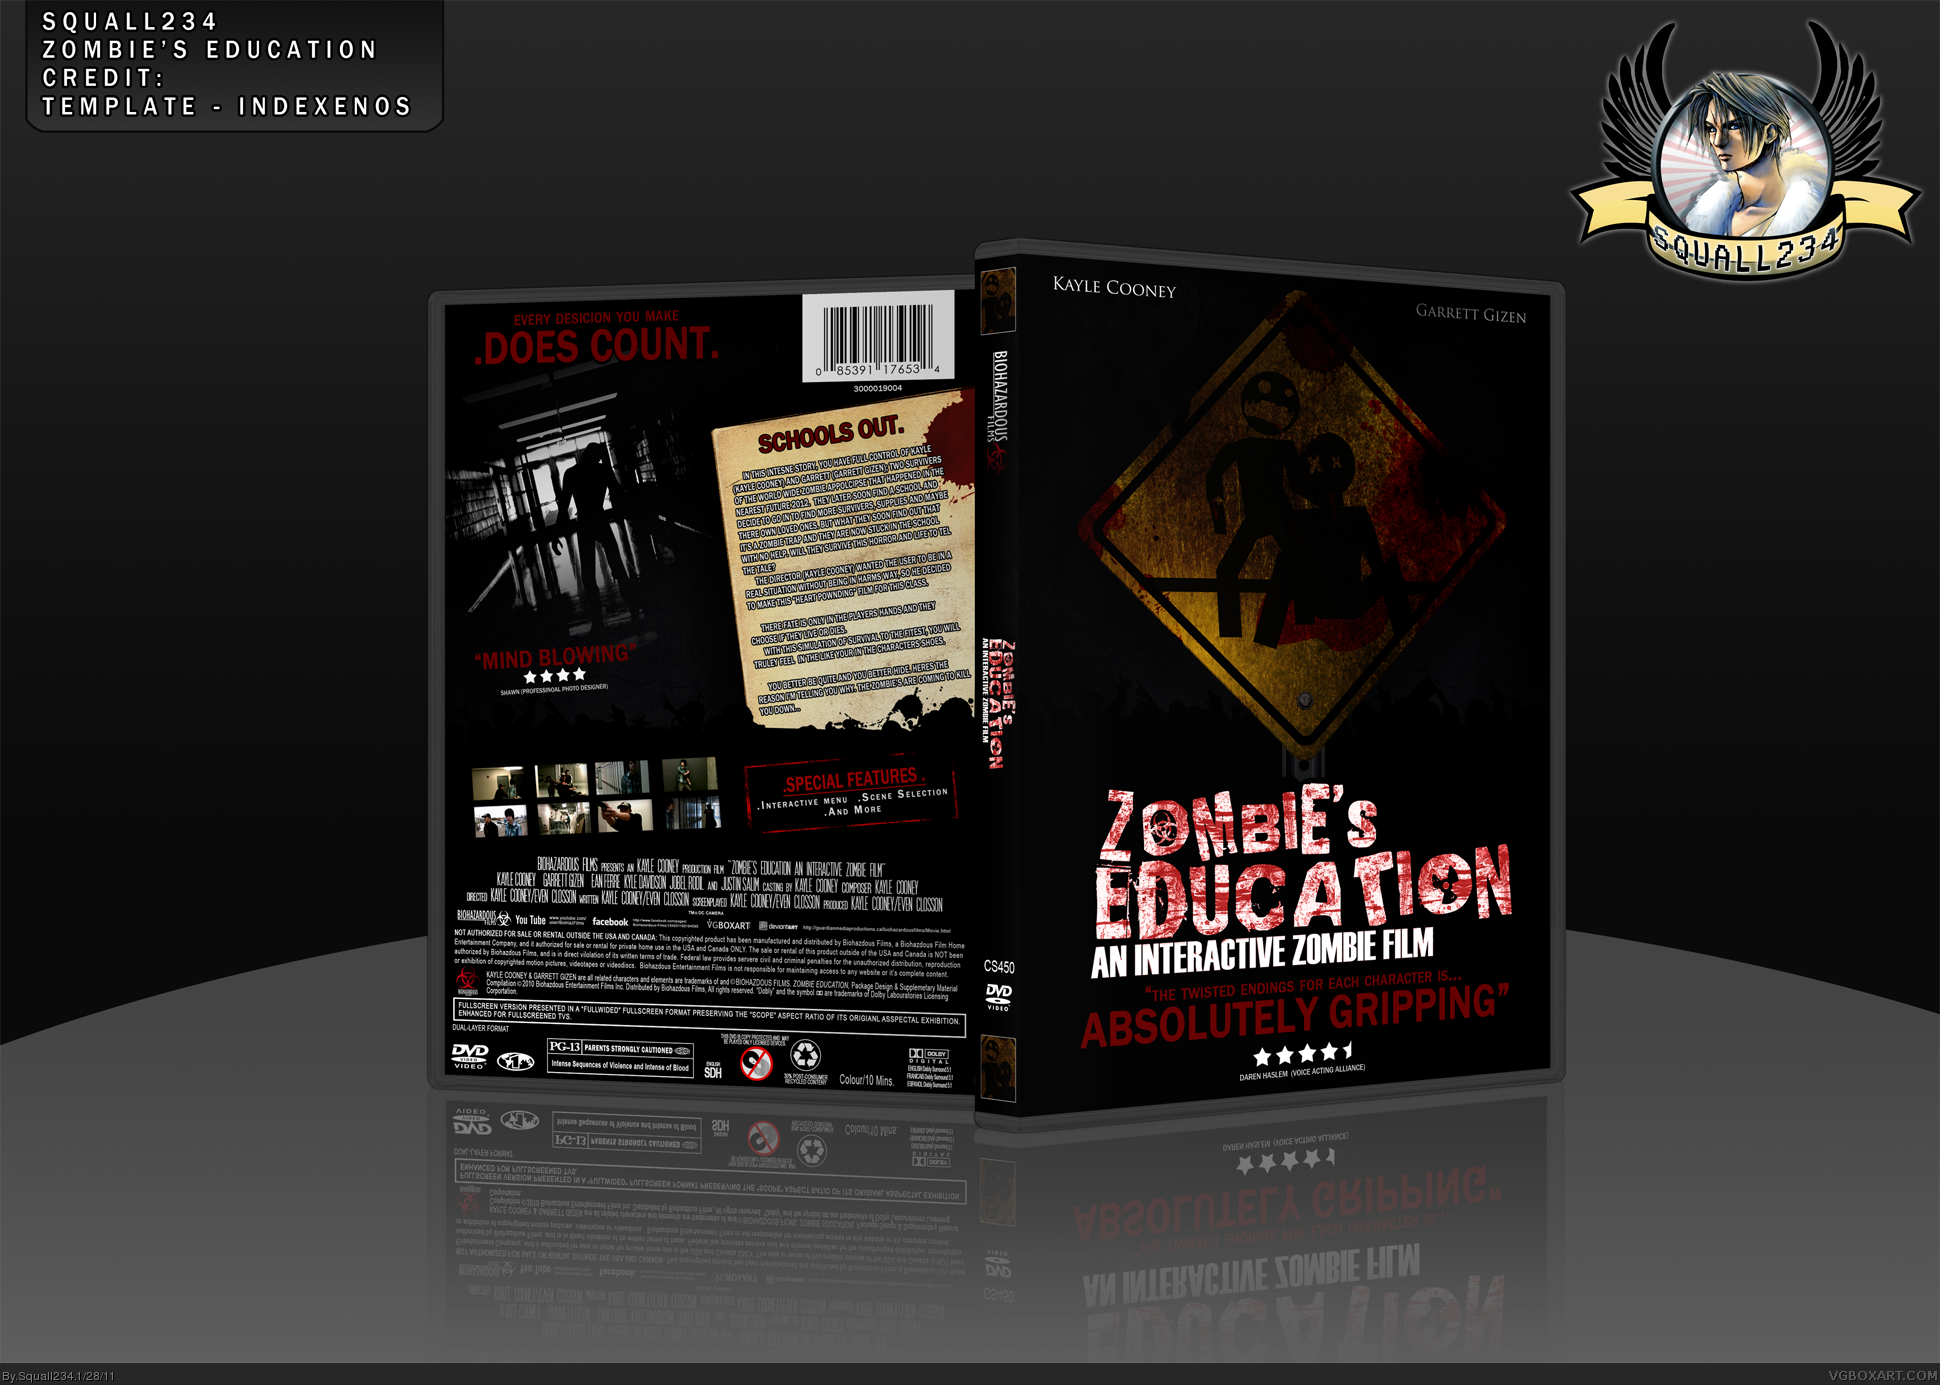 Zombie's Education - An Interactive Film box cover